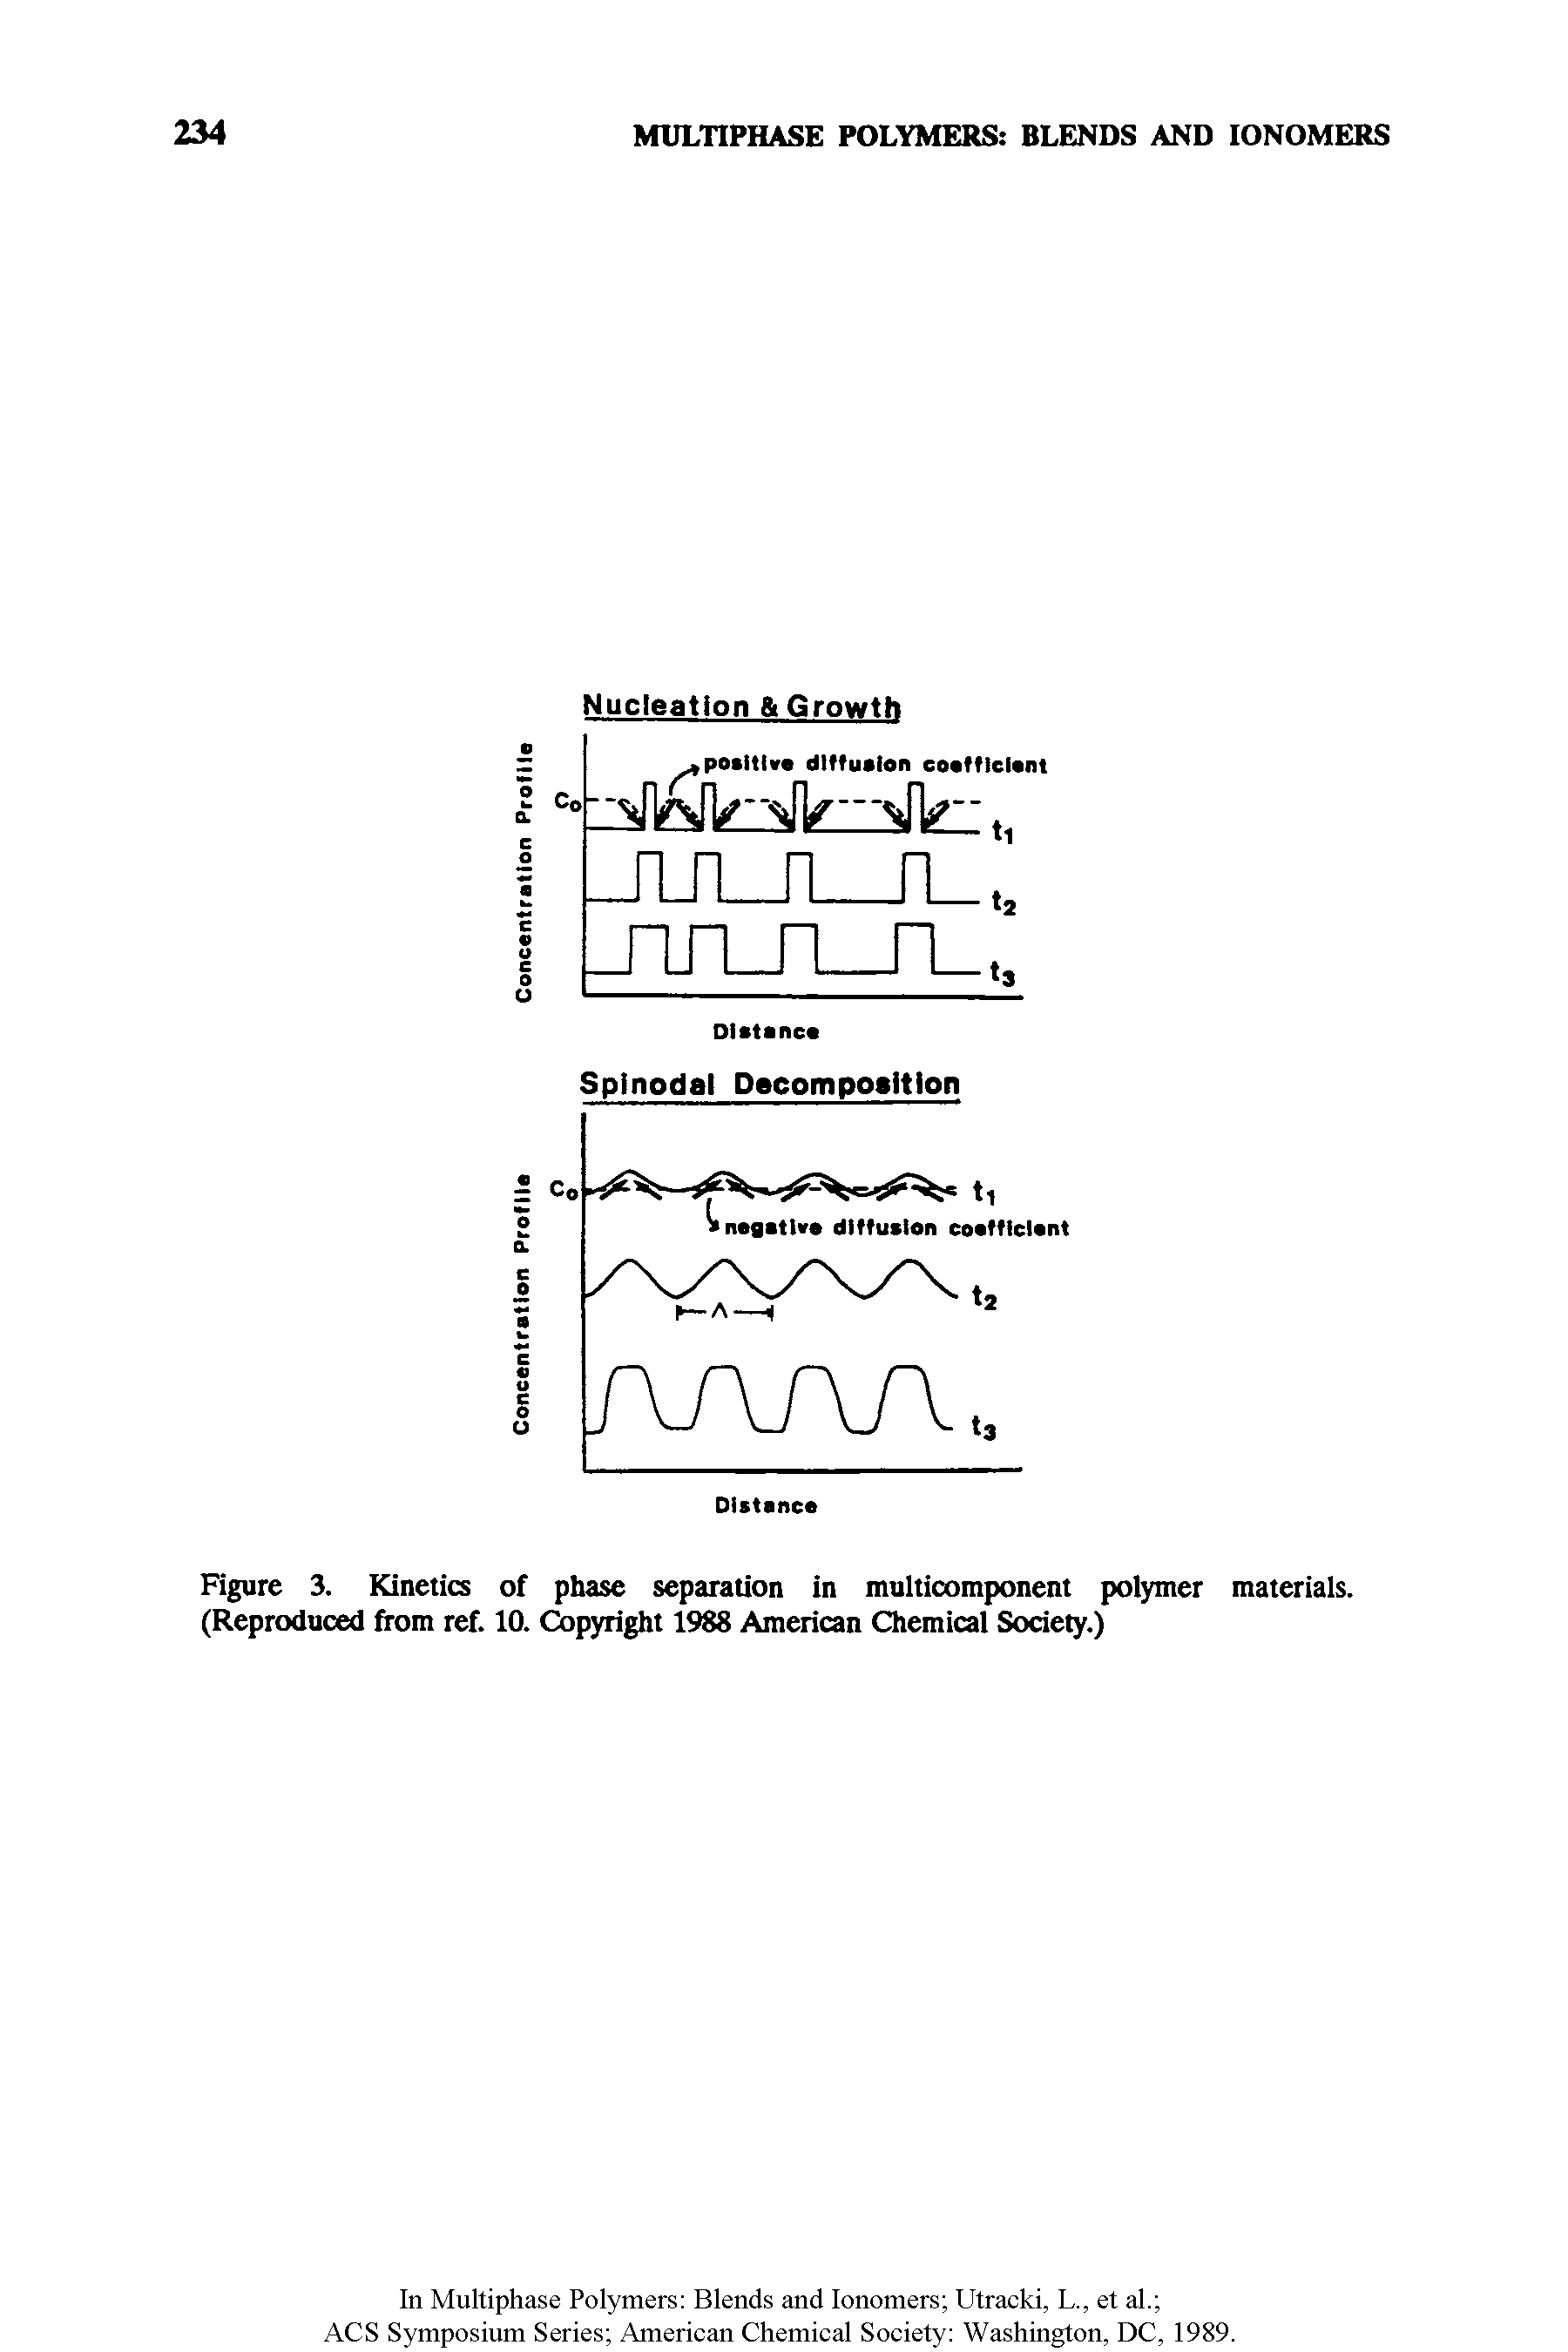 Figure 3. Kinetics of phase separation in multicomponent polymer materials. (Reproduced from ref. 10. Copyright 1988 American Chemical Society.)...